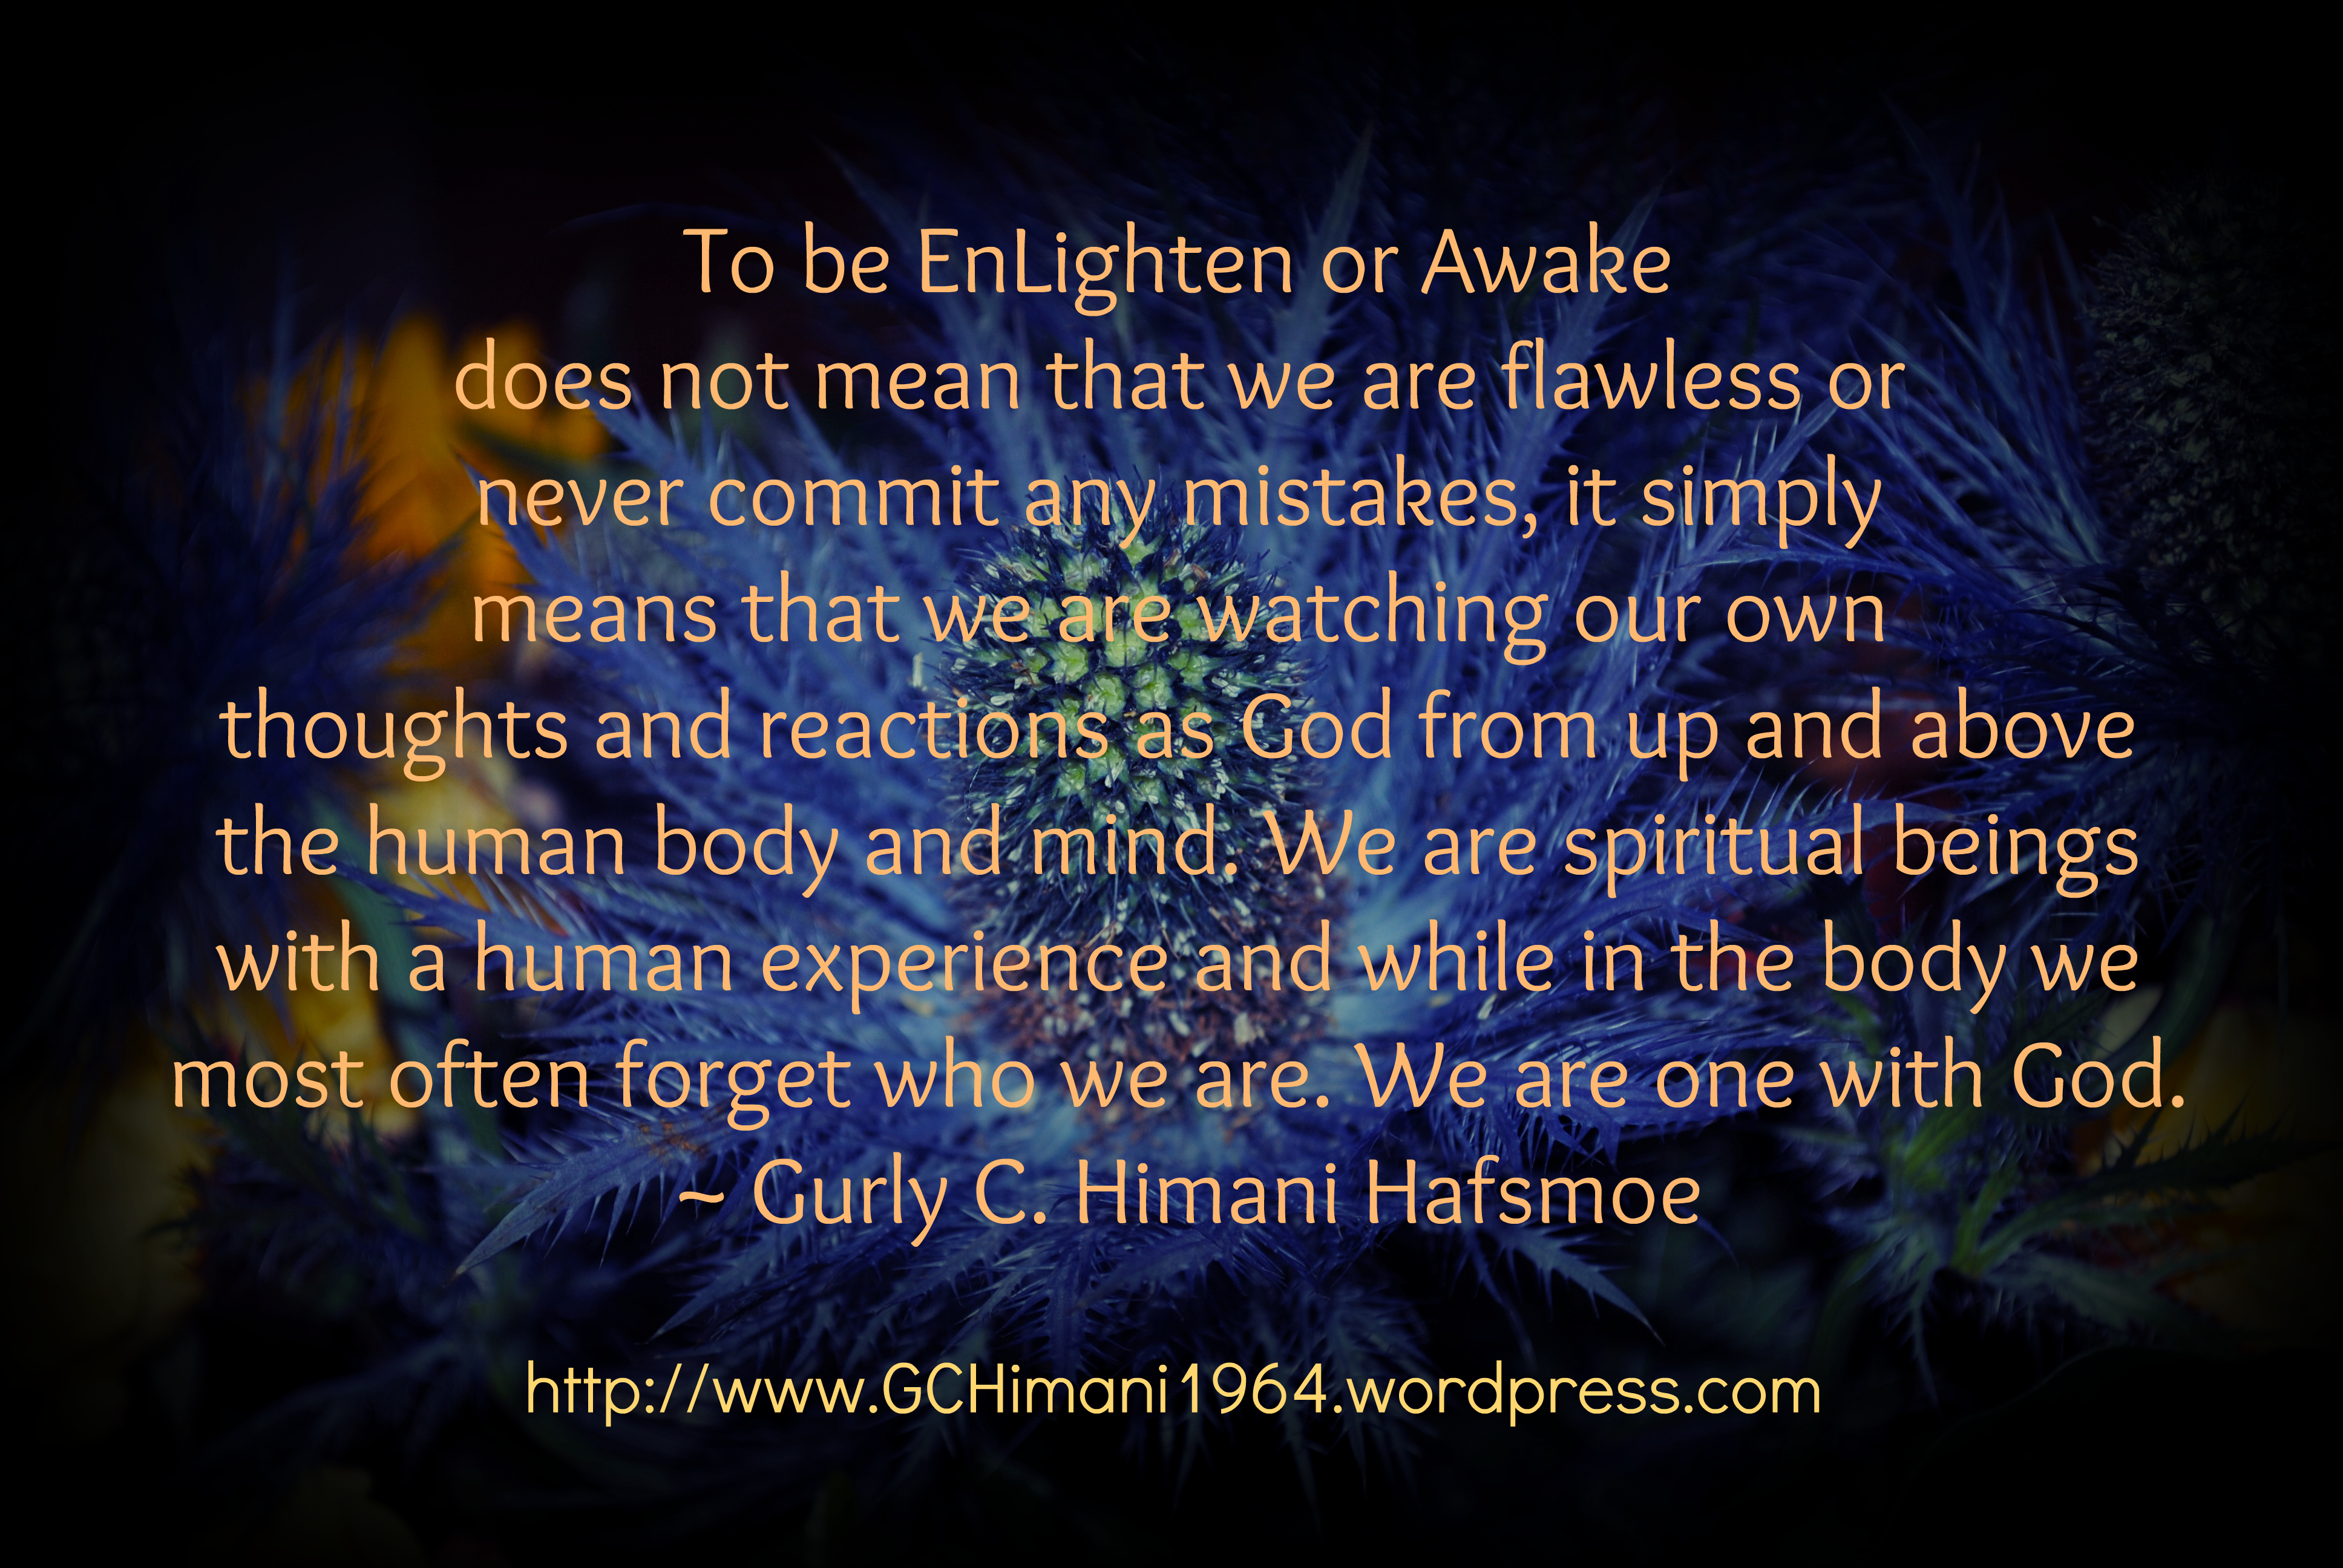 To be EnLighten or Awake does not mean that we are flawless or never commit any mistakes, it simply means that we are watching our own thoughts and reactions... Gurly C. Himani Hafsmoe